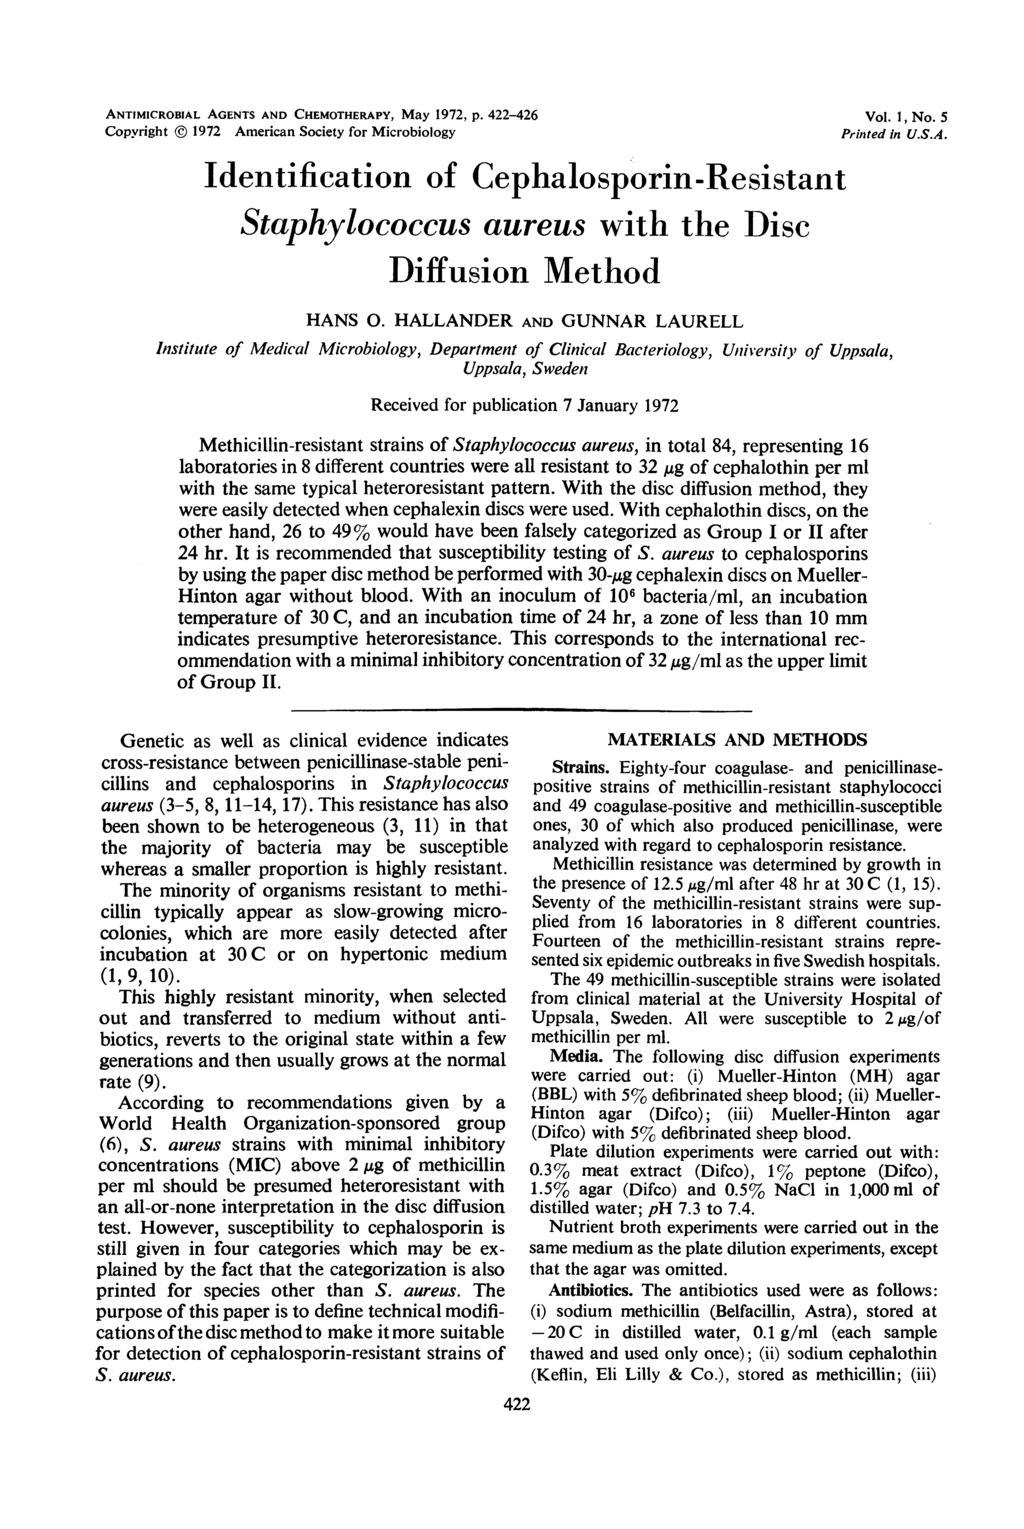 ANTIMICROBIAL AGENTS AND CHEMOTHERAPY, May 1972, p. 422-426 Vol. 1, No. 5 Copyright 1972 American Society for Microbiology Printed in U.S.A. Identification of Cephalosporin-Resistant Staphylococcus aureus with the Disc Diffusion Method HANS 0.